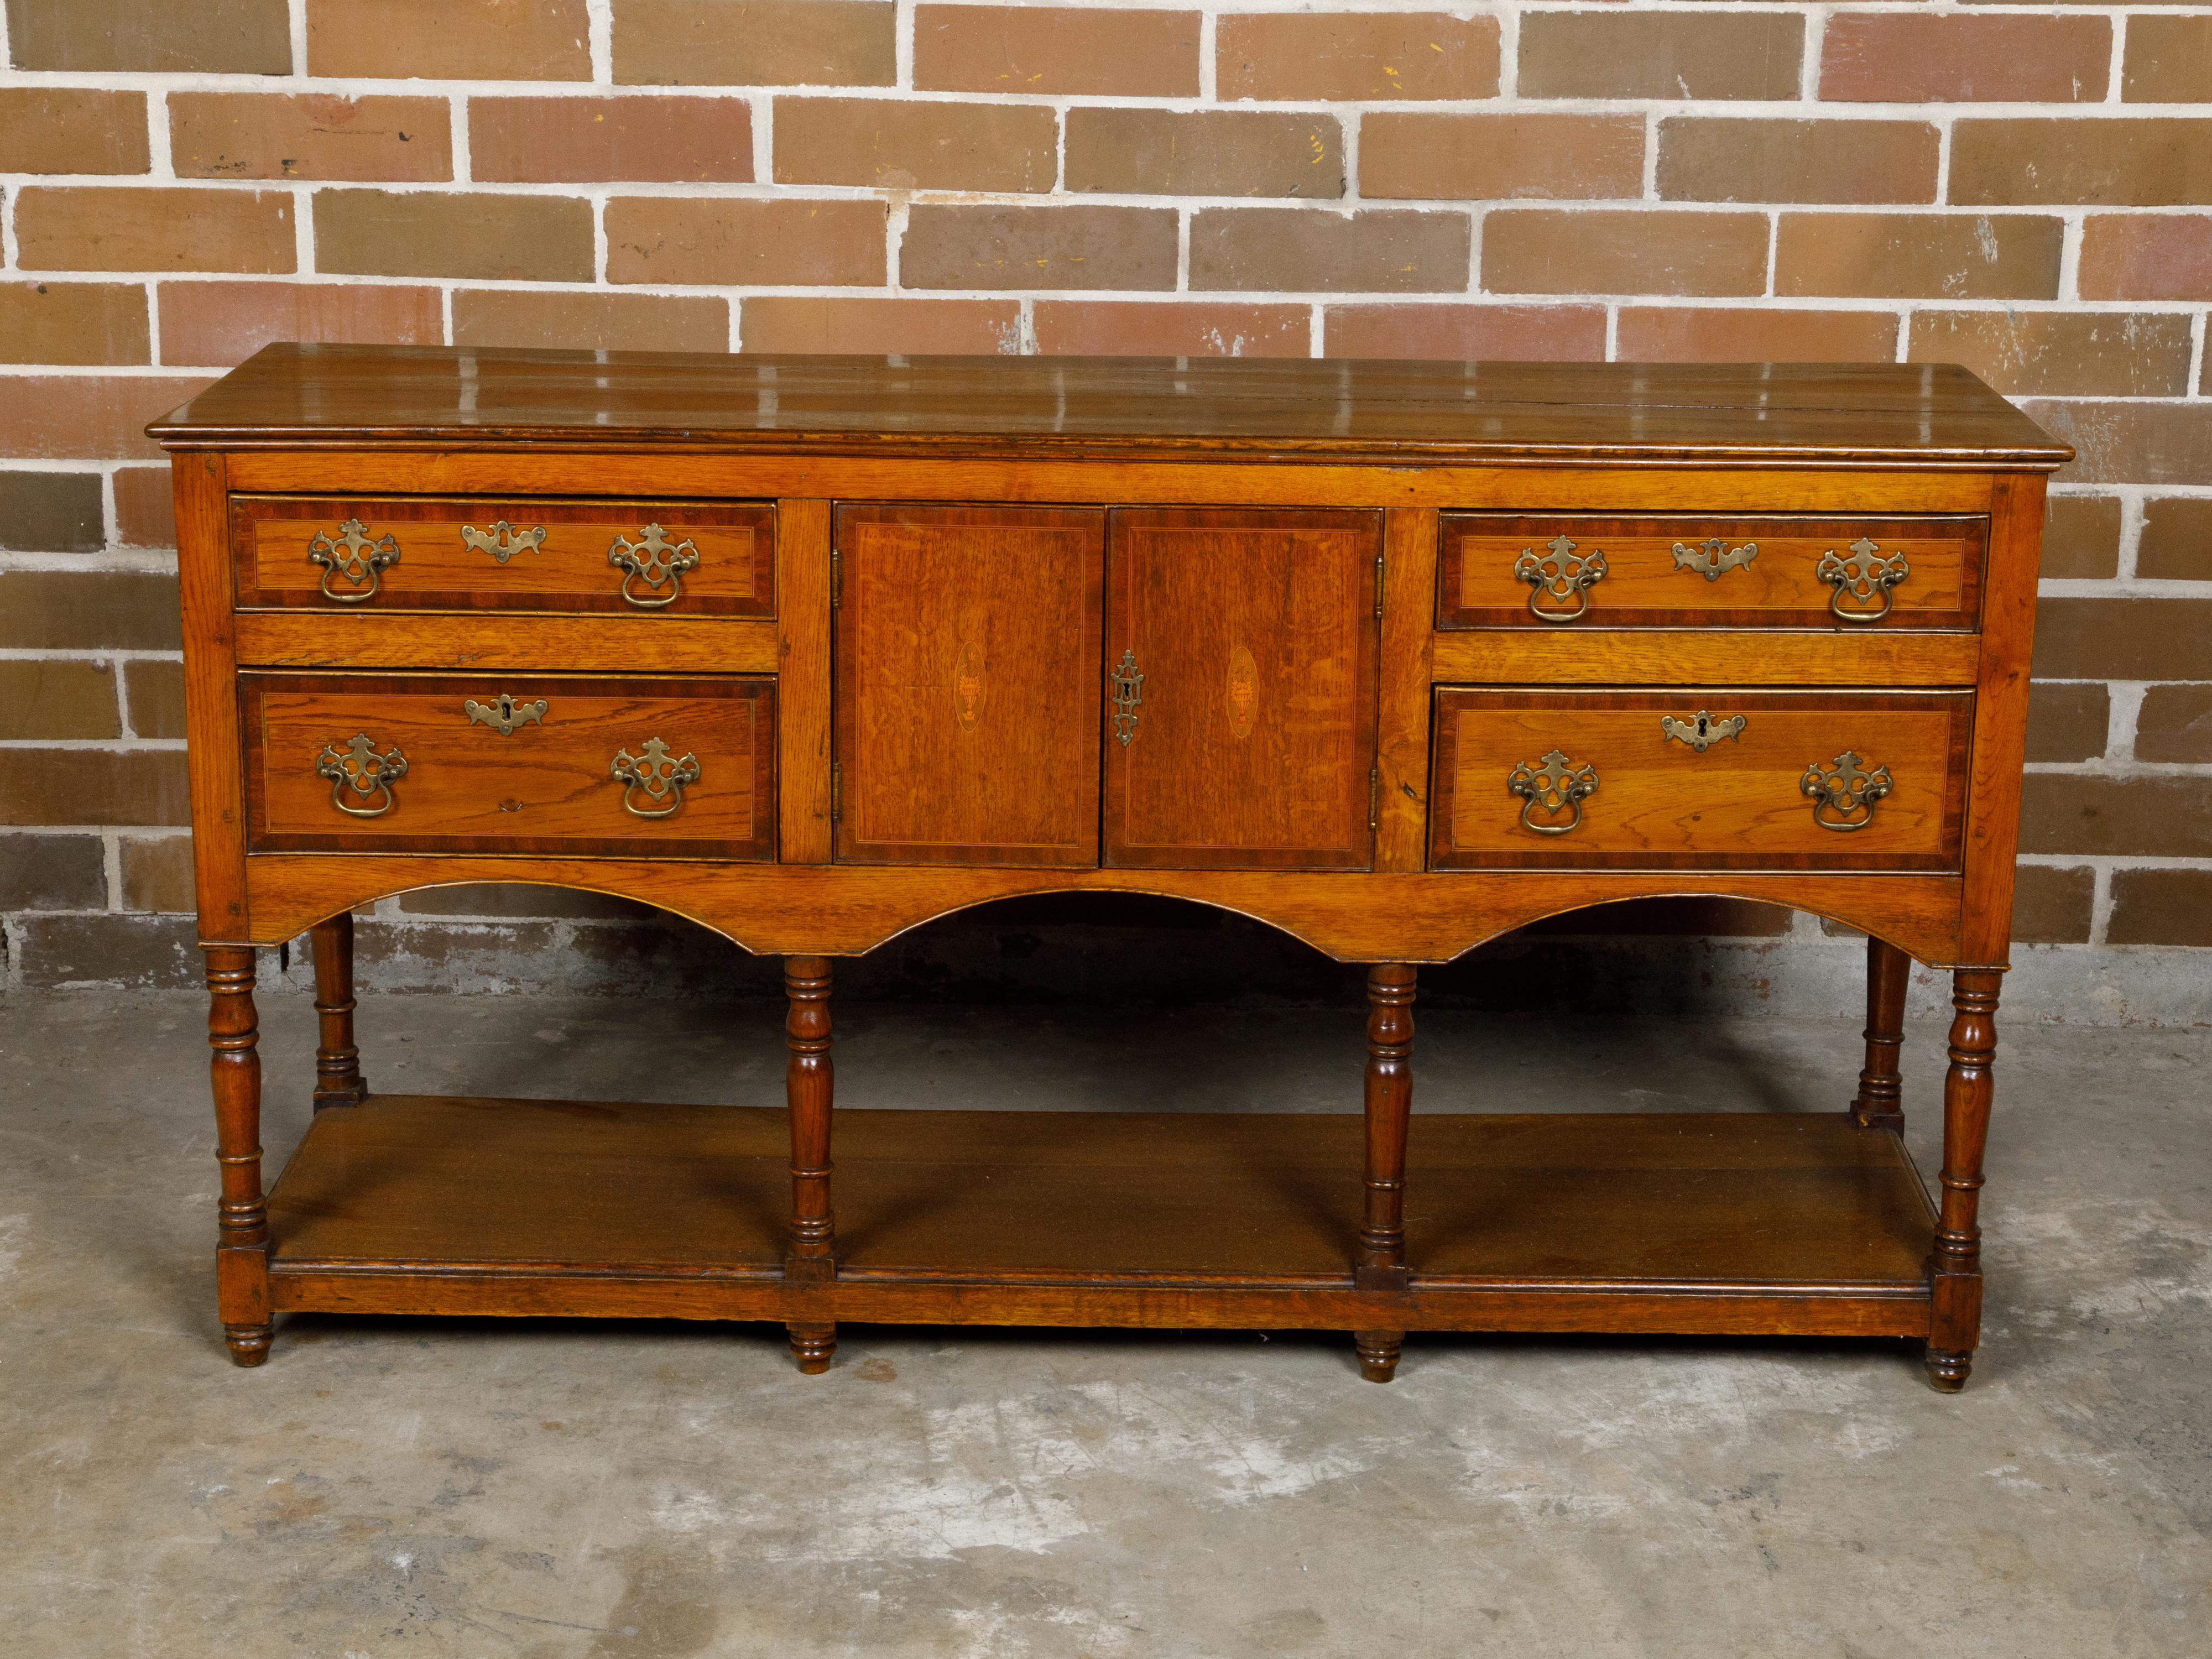 An English oak dresser base from the 19th century with marquetry, banding, doors and drawers. This 19th-century English oak dresser base is a testament to the era's exquisite craftsmanship and attention to detail. Featuring discreetly inlaid